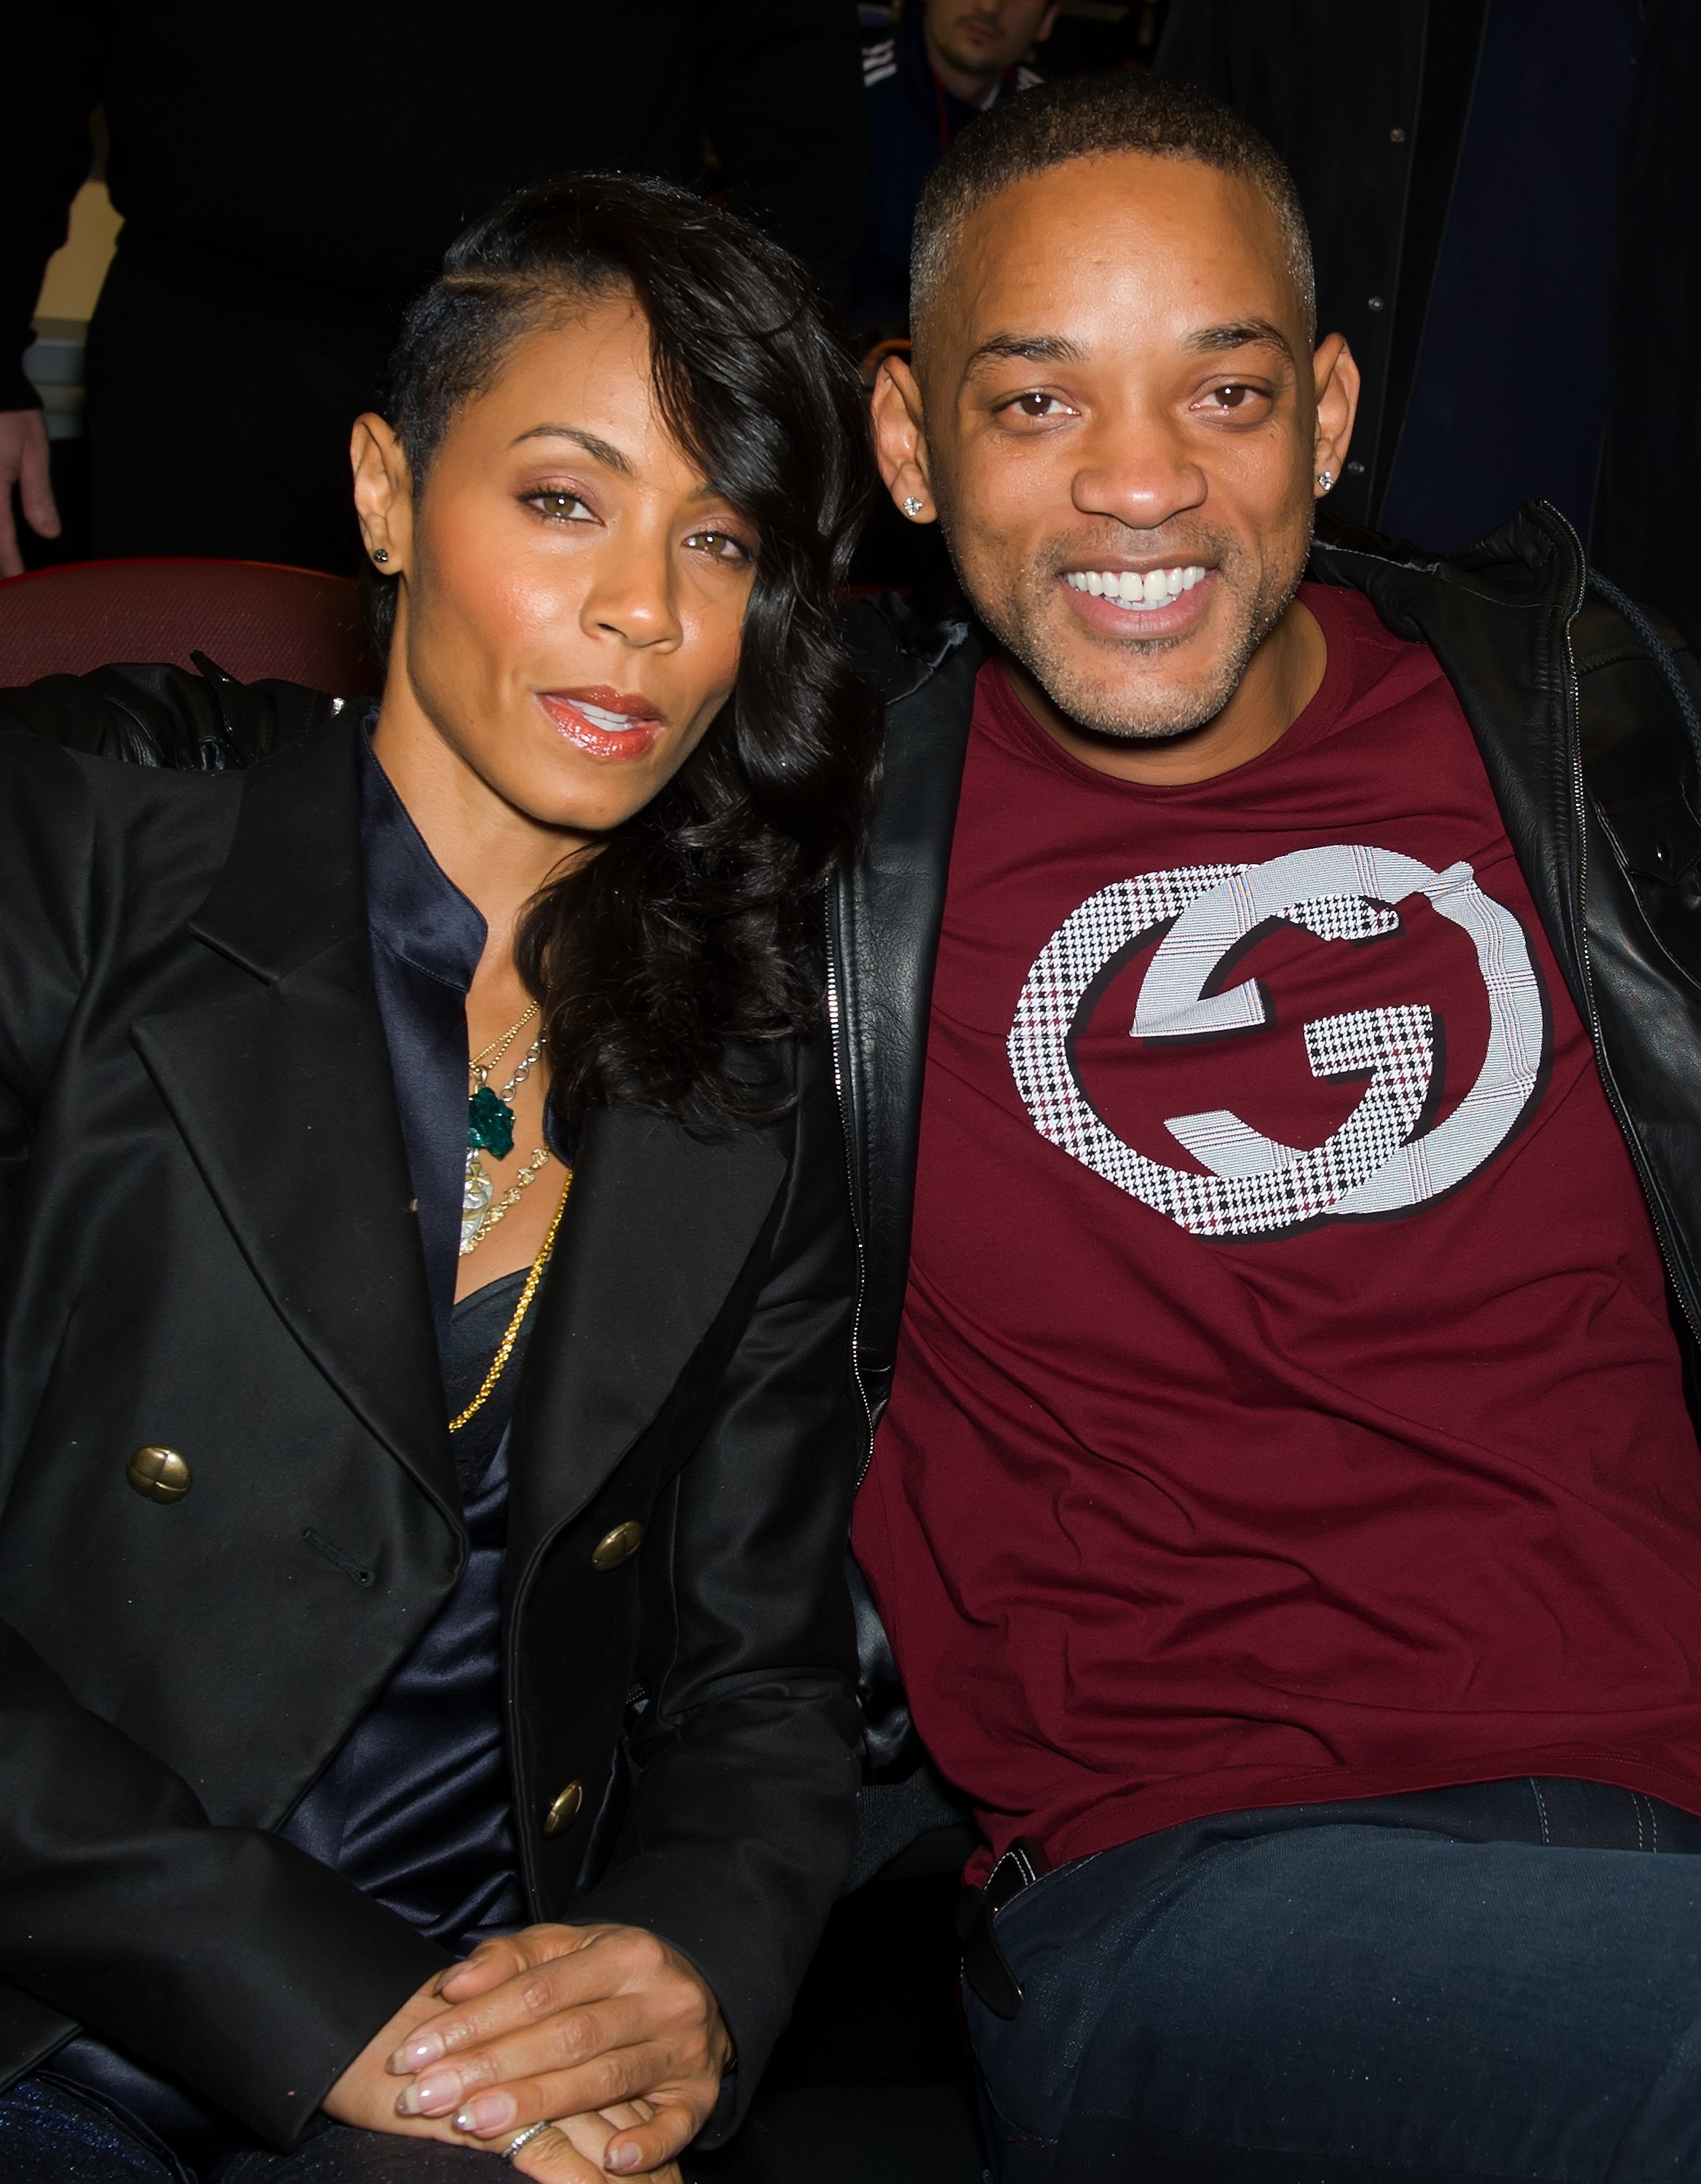 Will Smith and Jada Pinkett-Smith watching a Philadelphia 76ers game in January 2012. | Photo: Getty Images